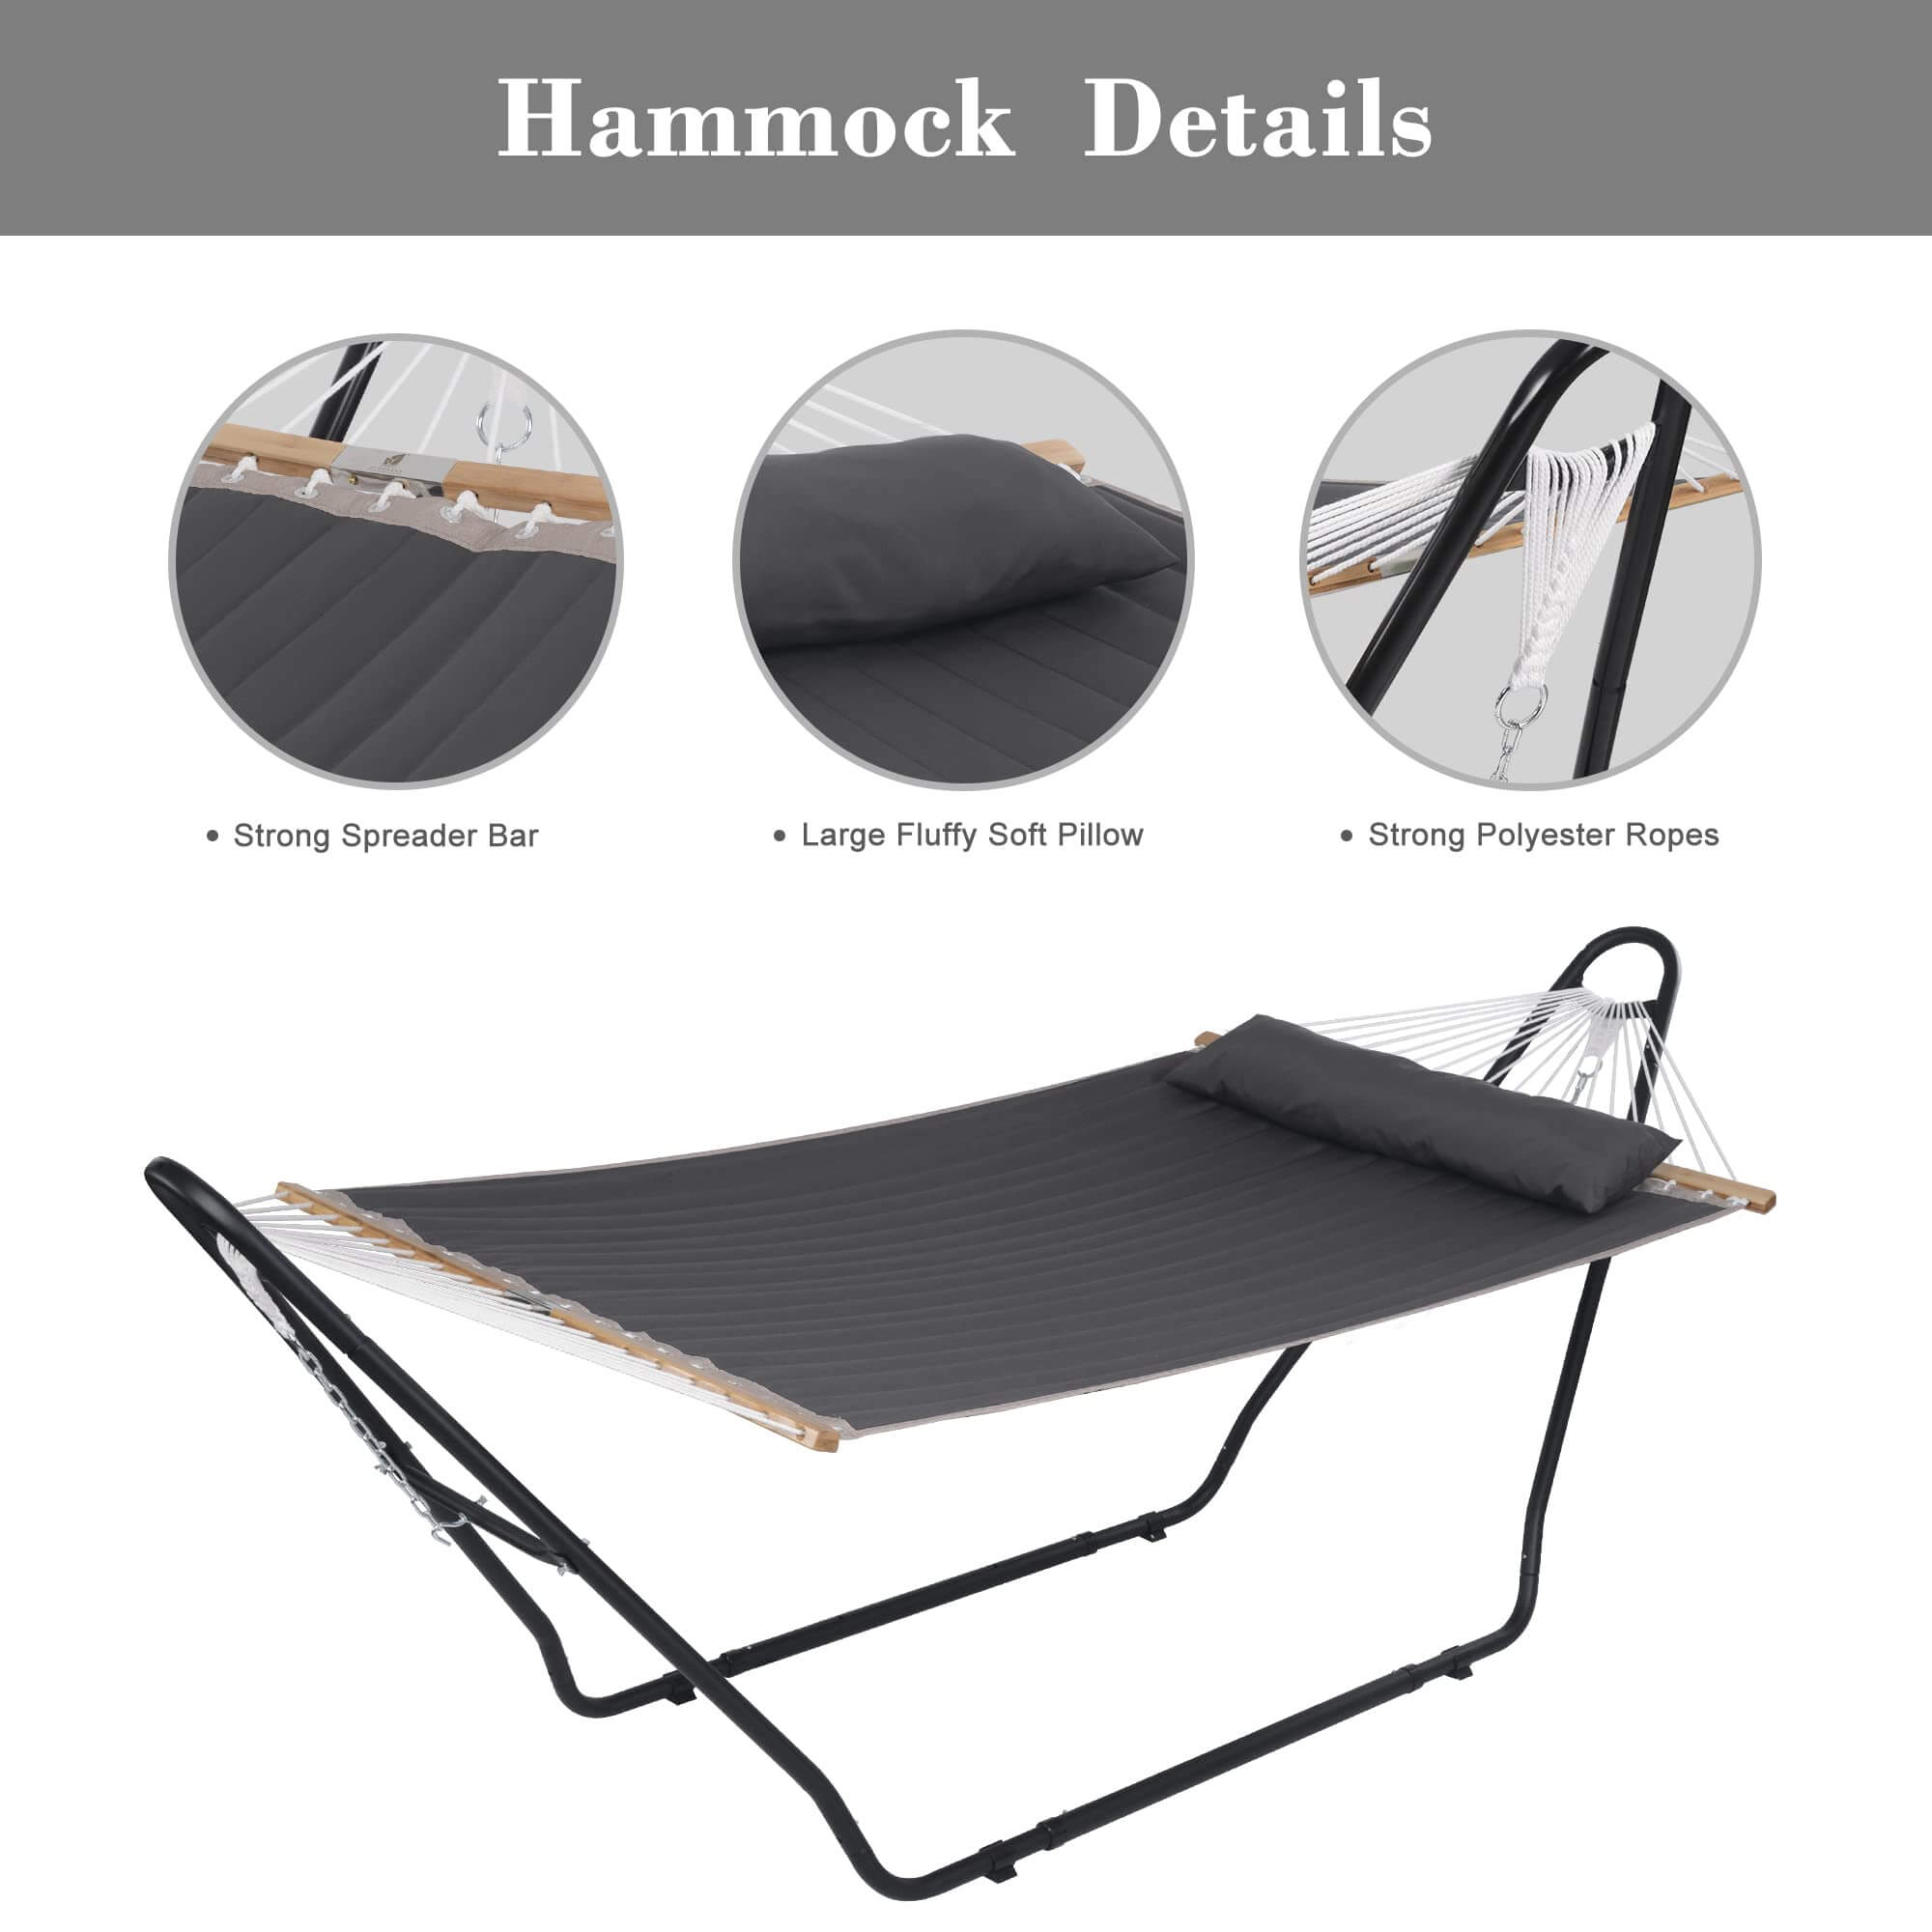 SUNCREAT-2-in-1 Portable-Double-Hammock-with-Stand-for-Outdoor-Dark-Gray#color_dark-gray